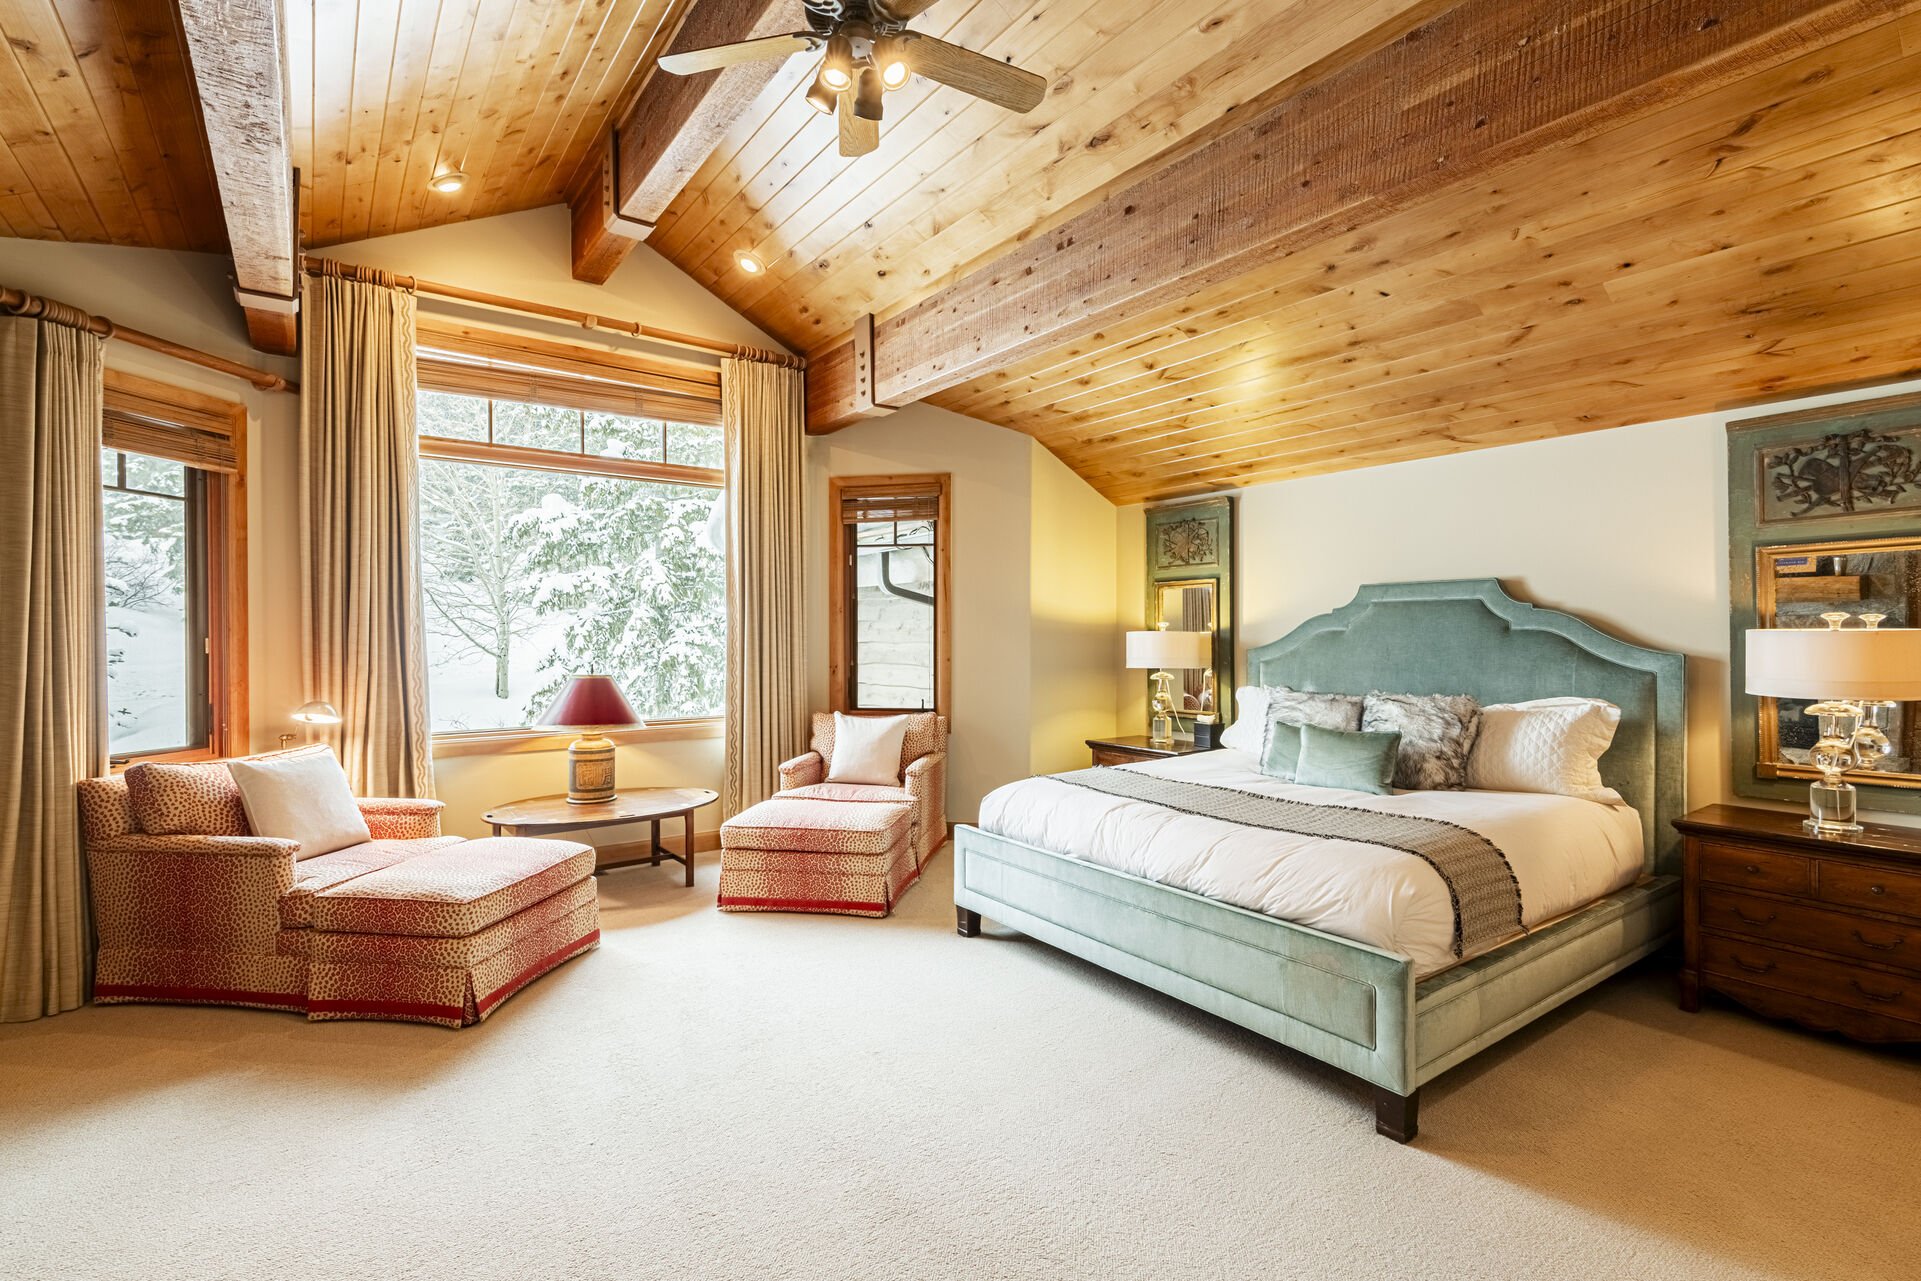 Grand Master Bedroom (4th Level) with a king bed, vaulted ceiling and natural light